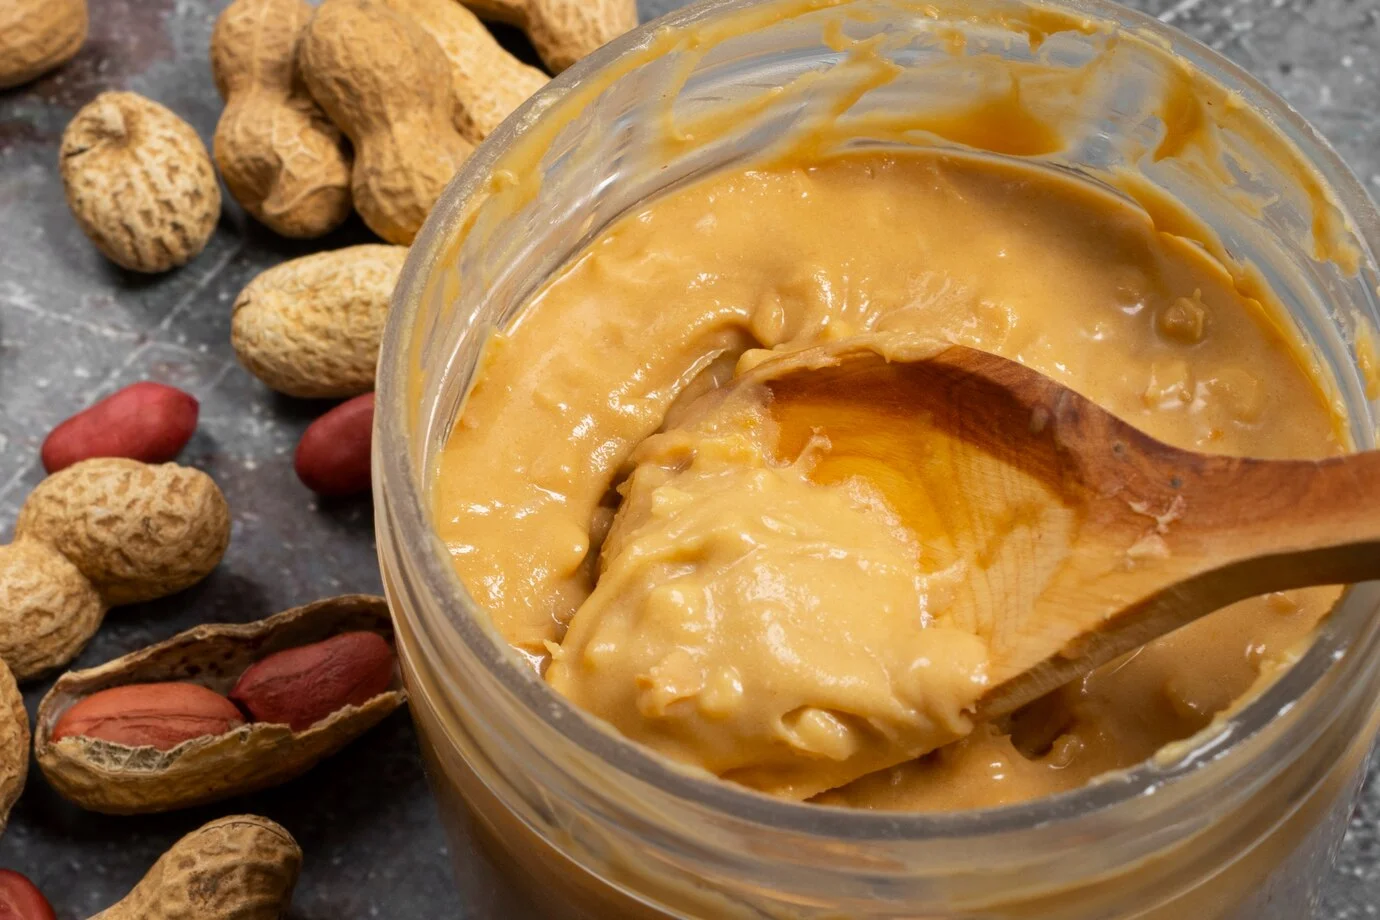 Is Peanut Butter Made From Blanched Peanuts?